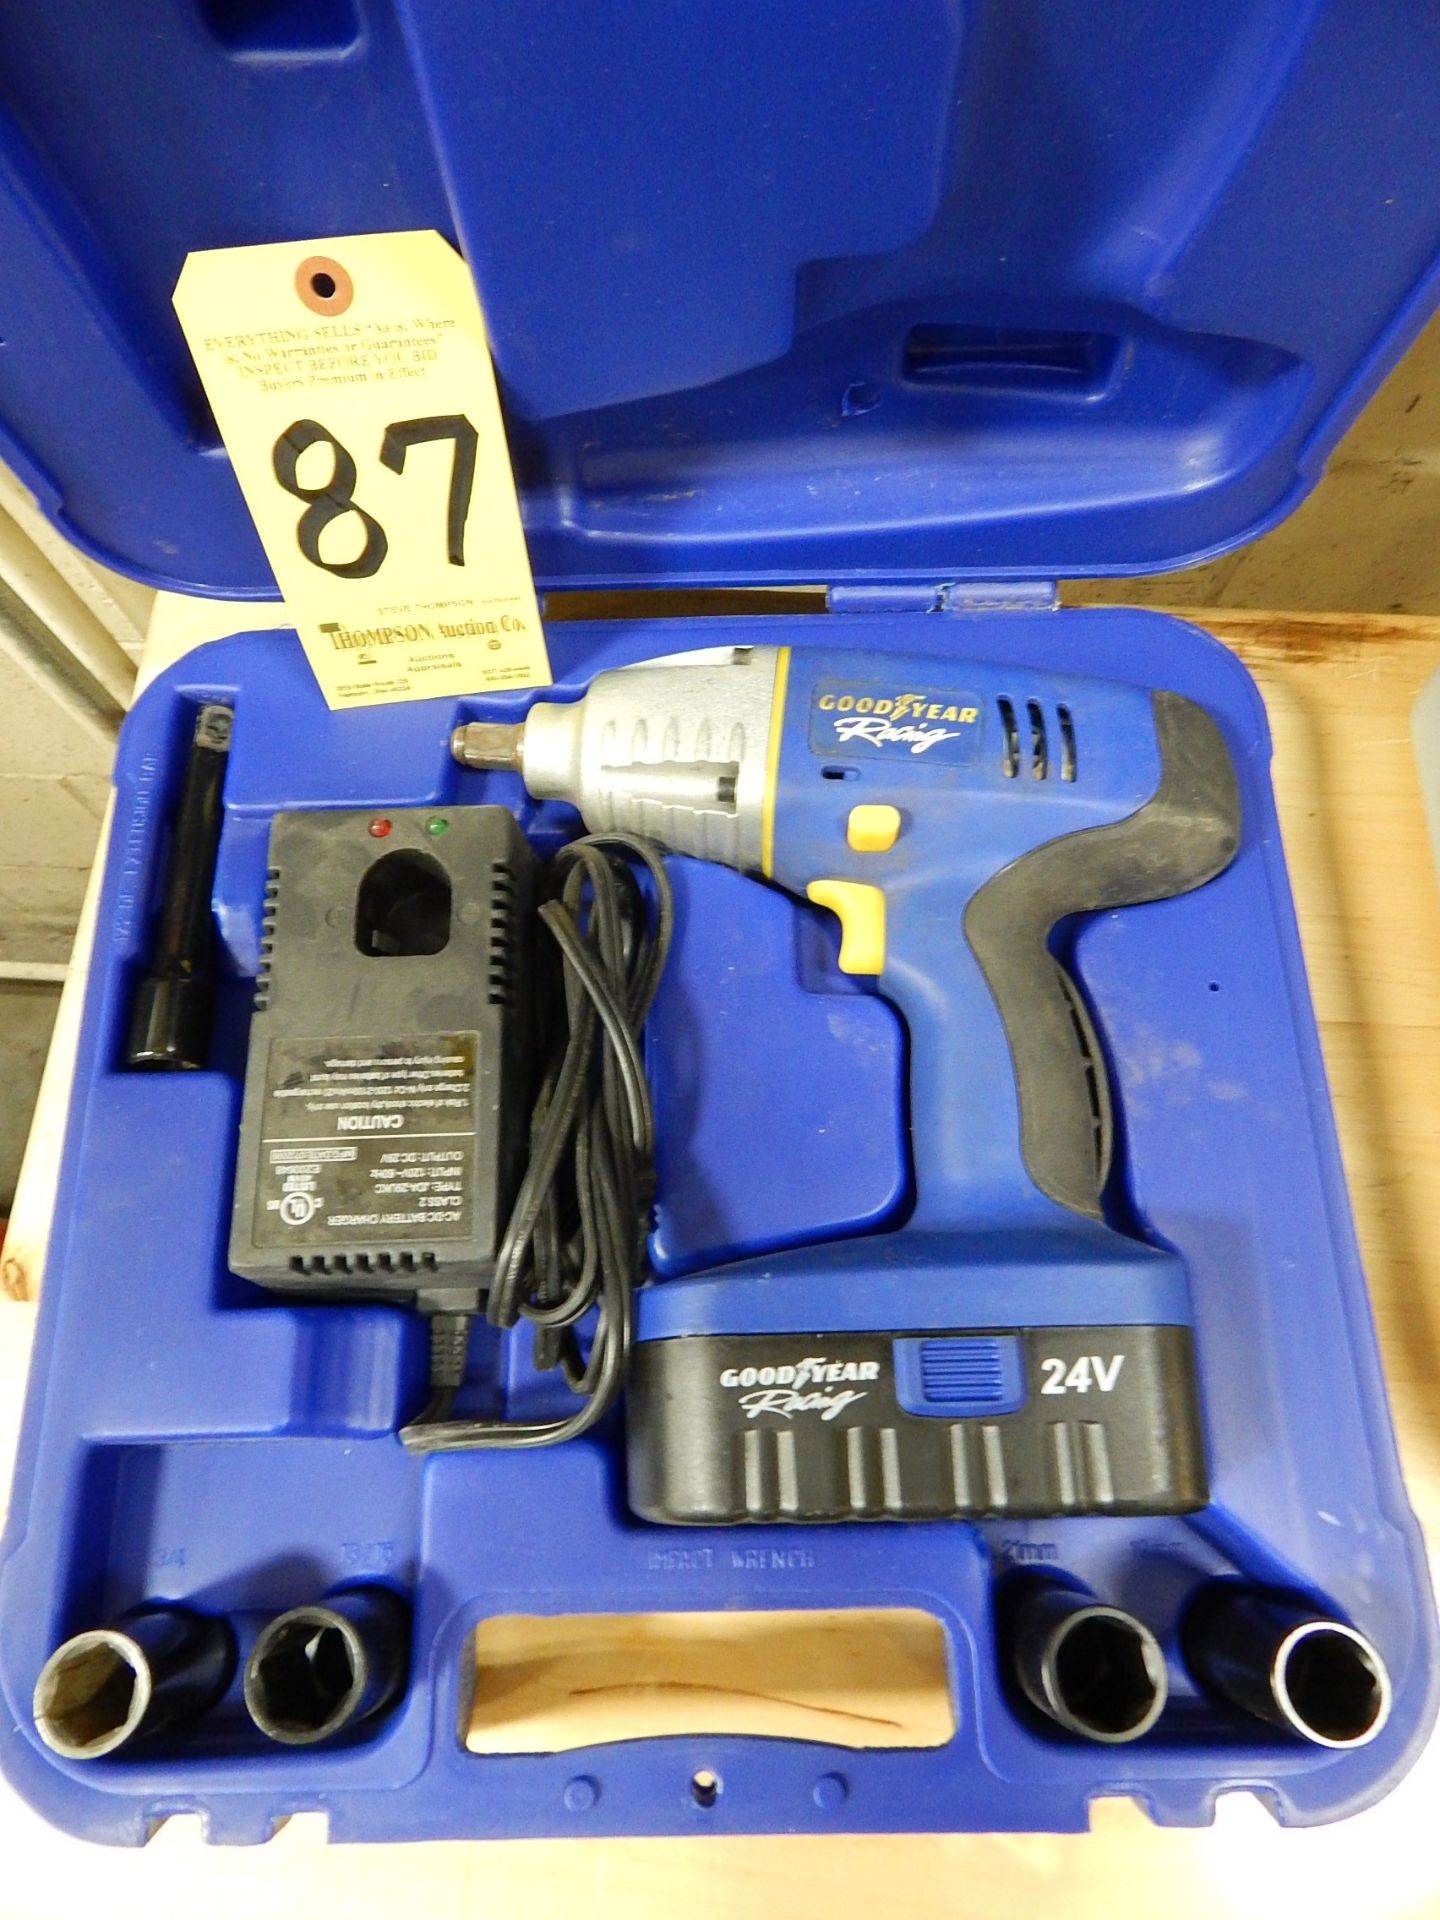 Goodyear Racing 24V Cordless Impact Wrench w/ Charger, Sockets, Case, 1/2" Drive